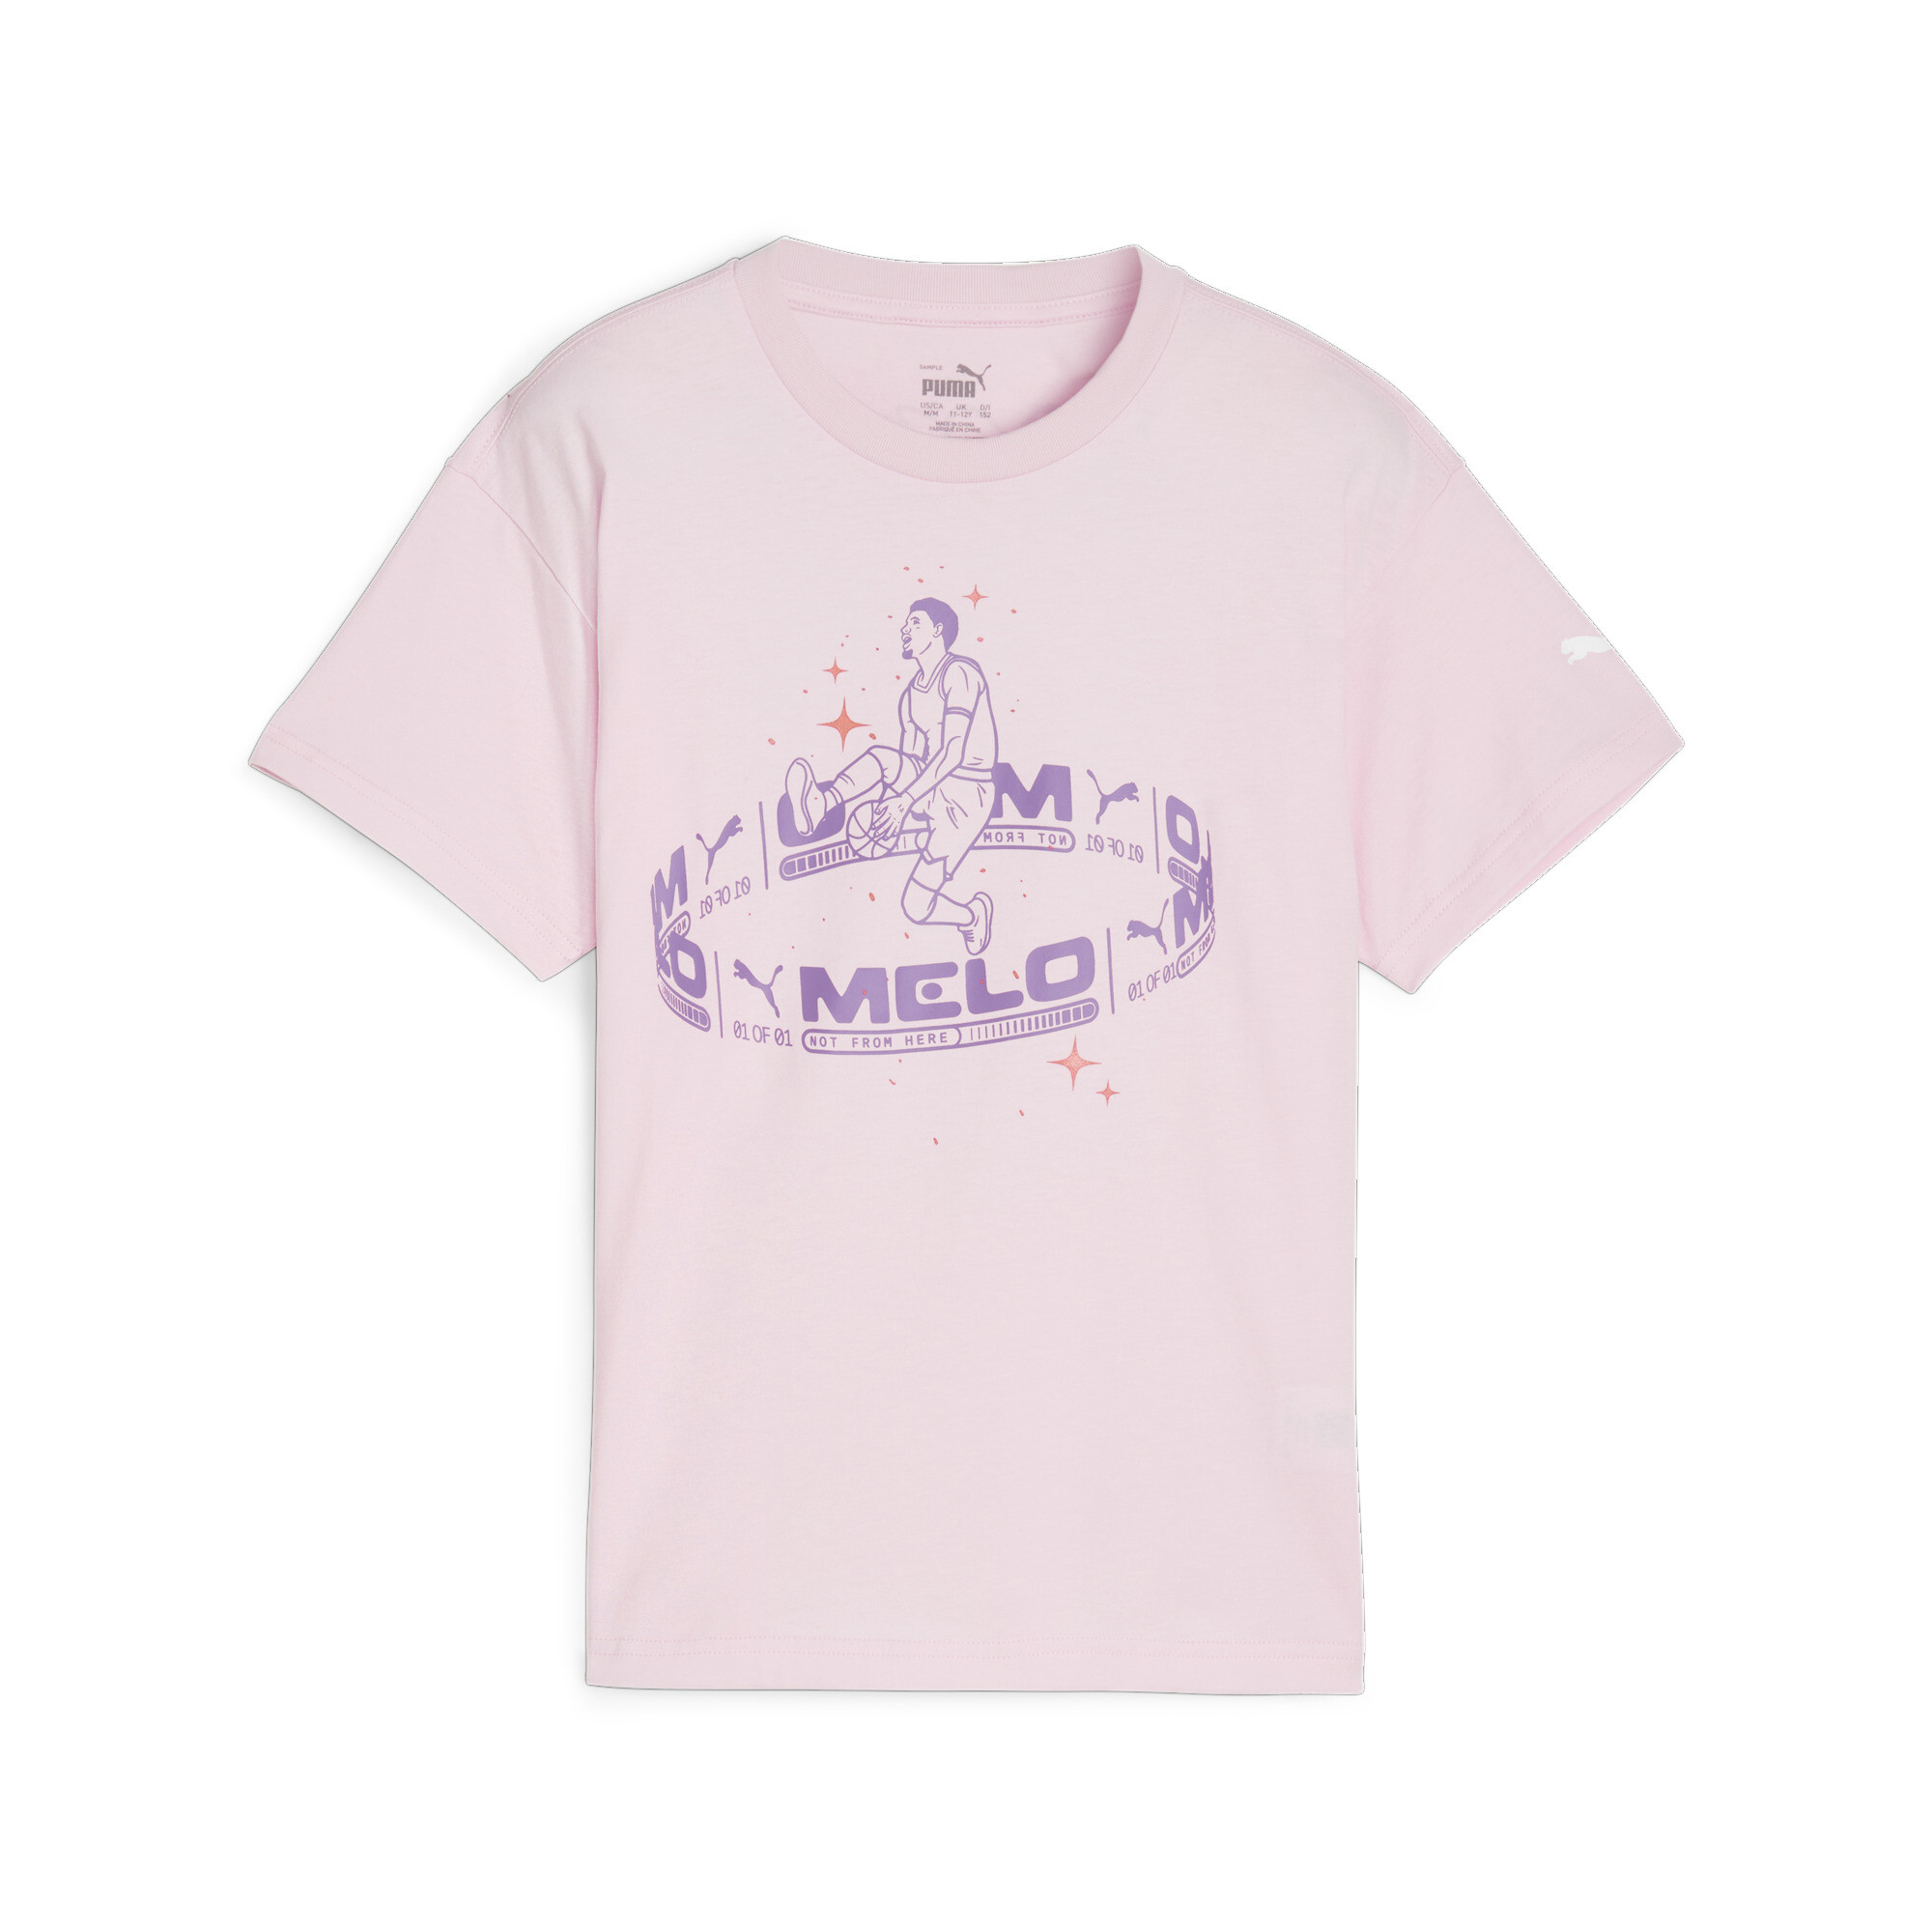 Puma MELO IRIDESCENT Boys' T-Shirt, Pink, Size 15-16Y, Age